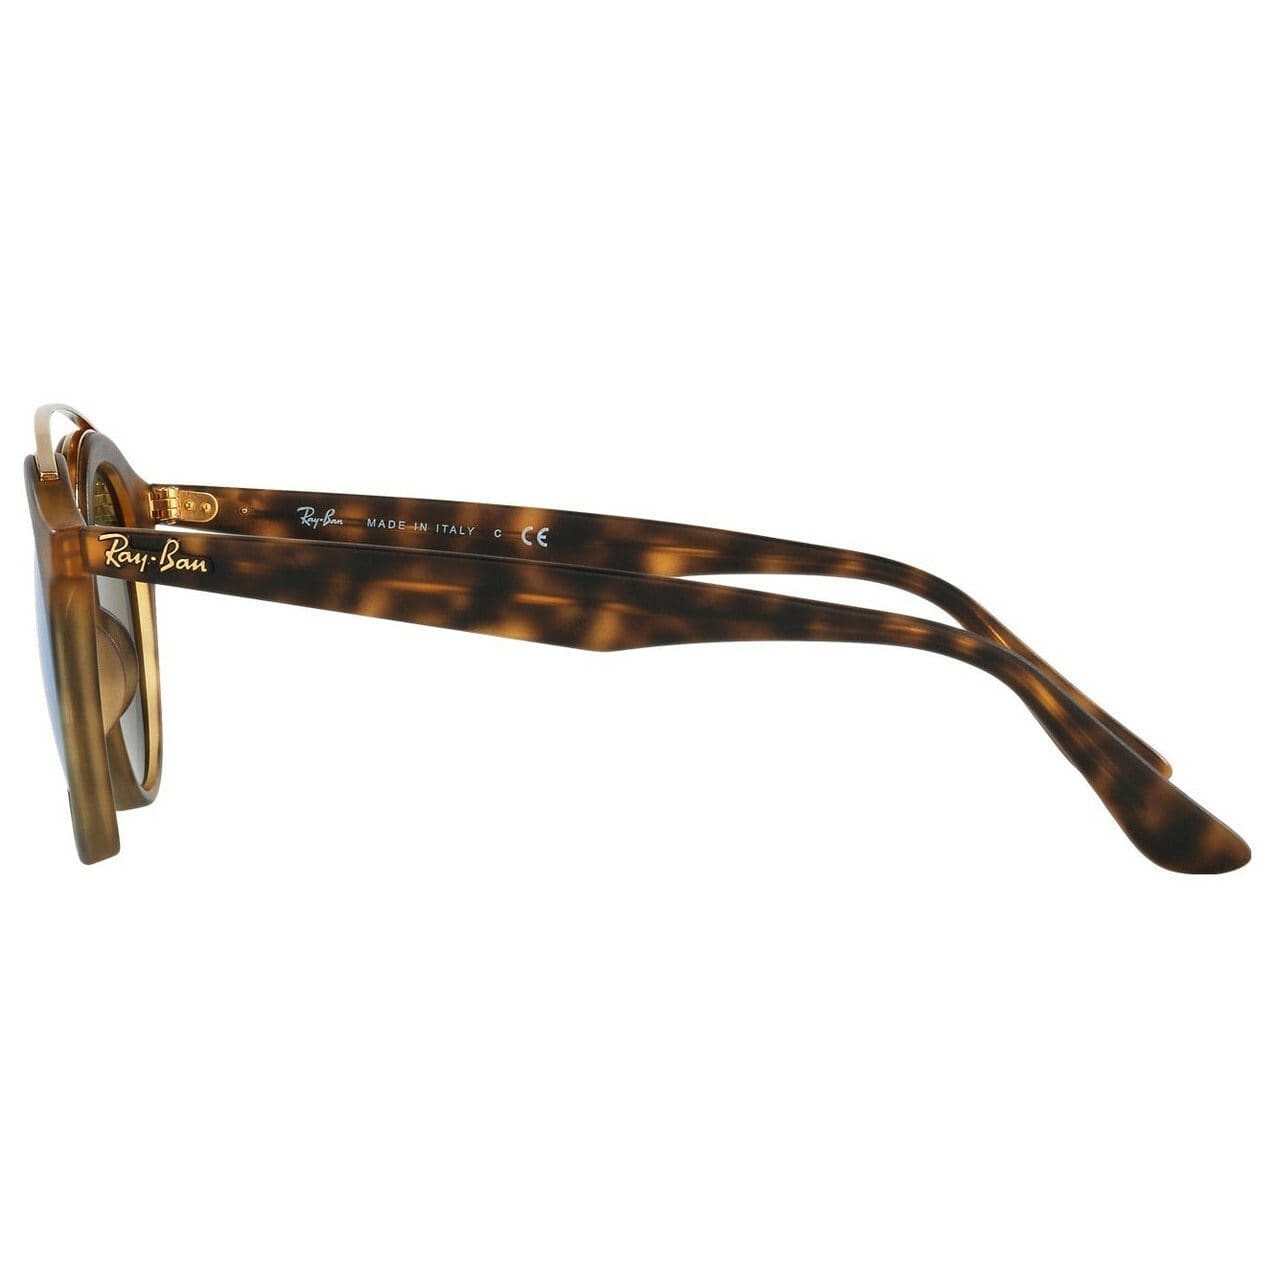 Ray-Ban RB4256 60923R Gatsby I Sunglasses Tortoise / Gold Frame With Green Mirror Lens 8053672584332